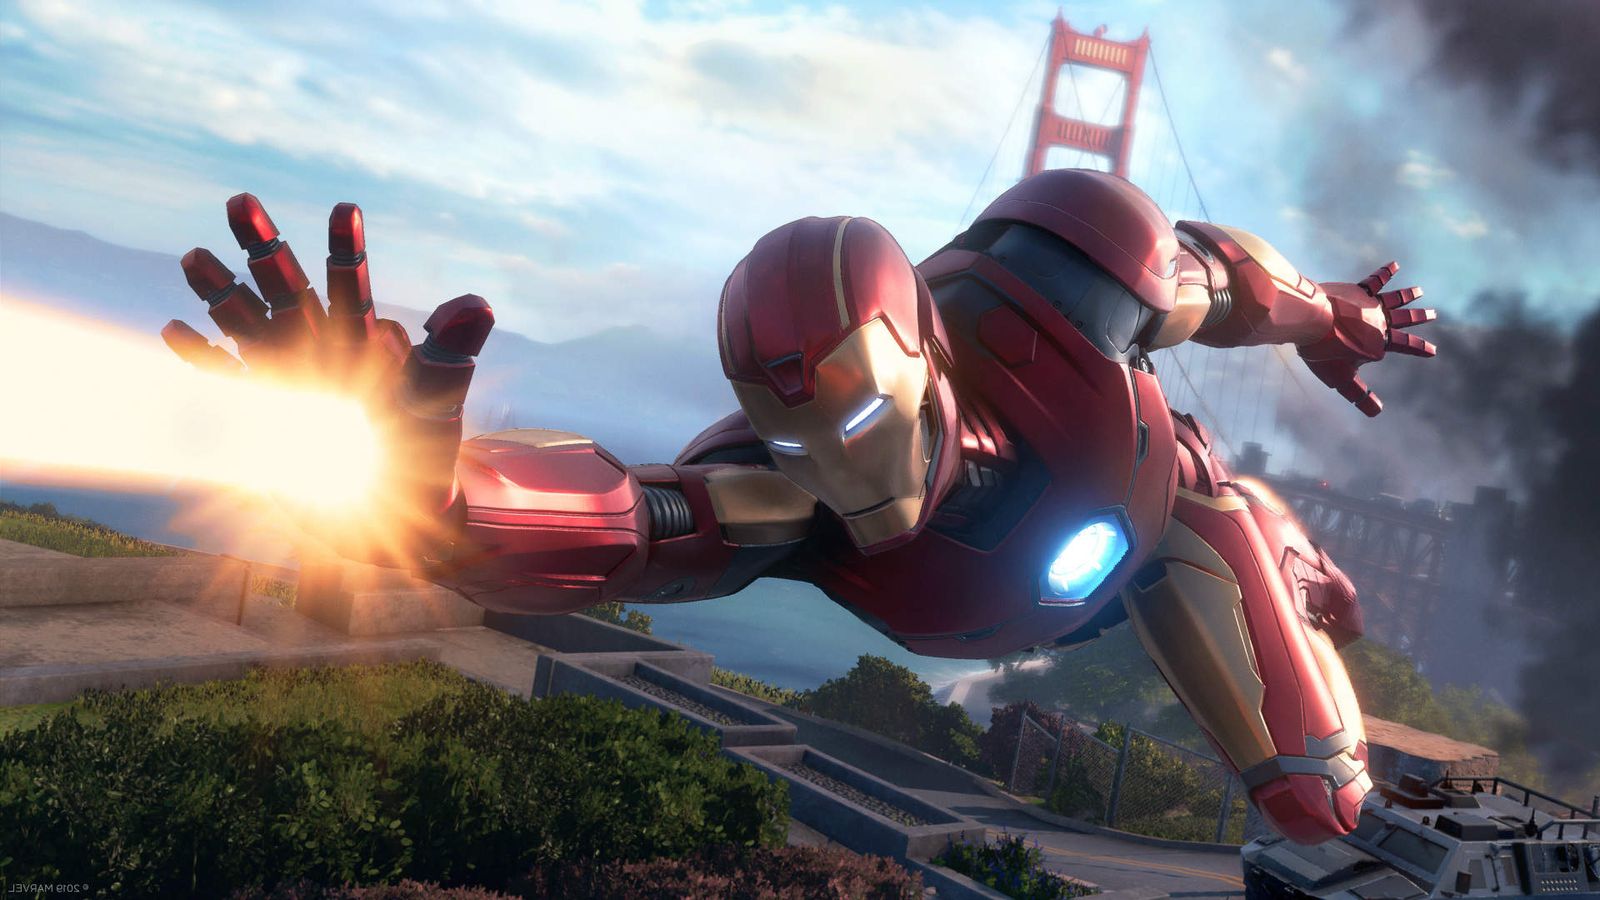 ea iron man game will be set in a sprawling open world